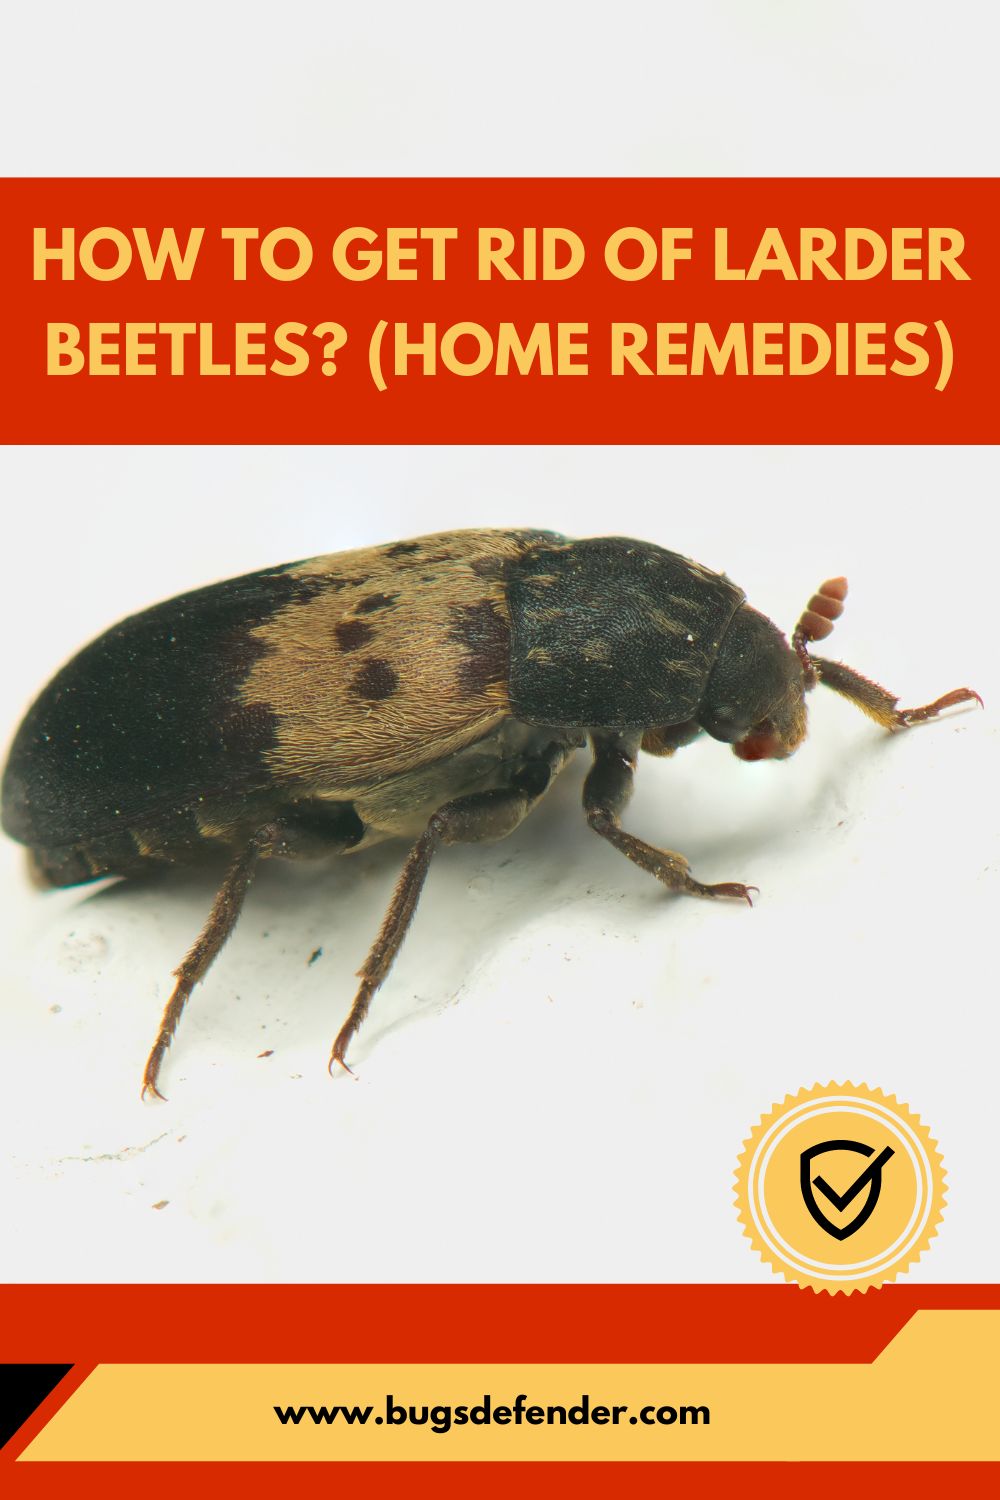 How To Get Rid Of Larder Beetles? (Home Remedies) pin 1